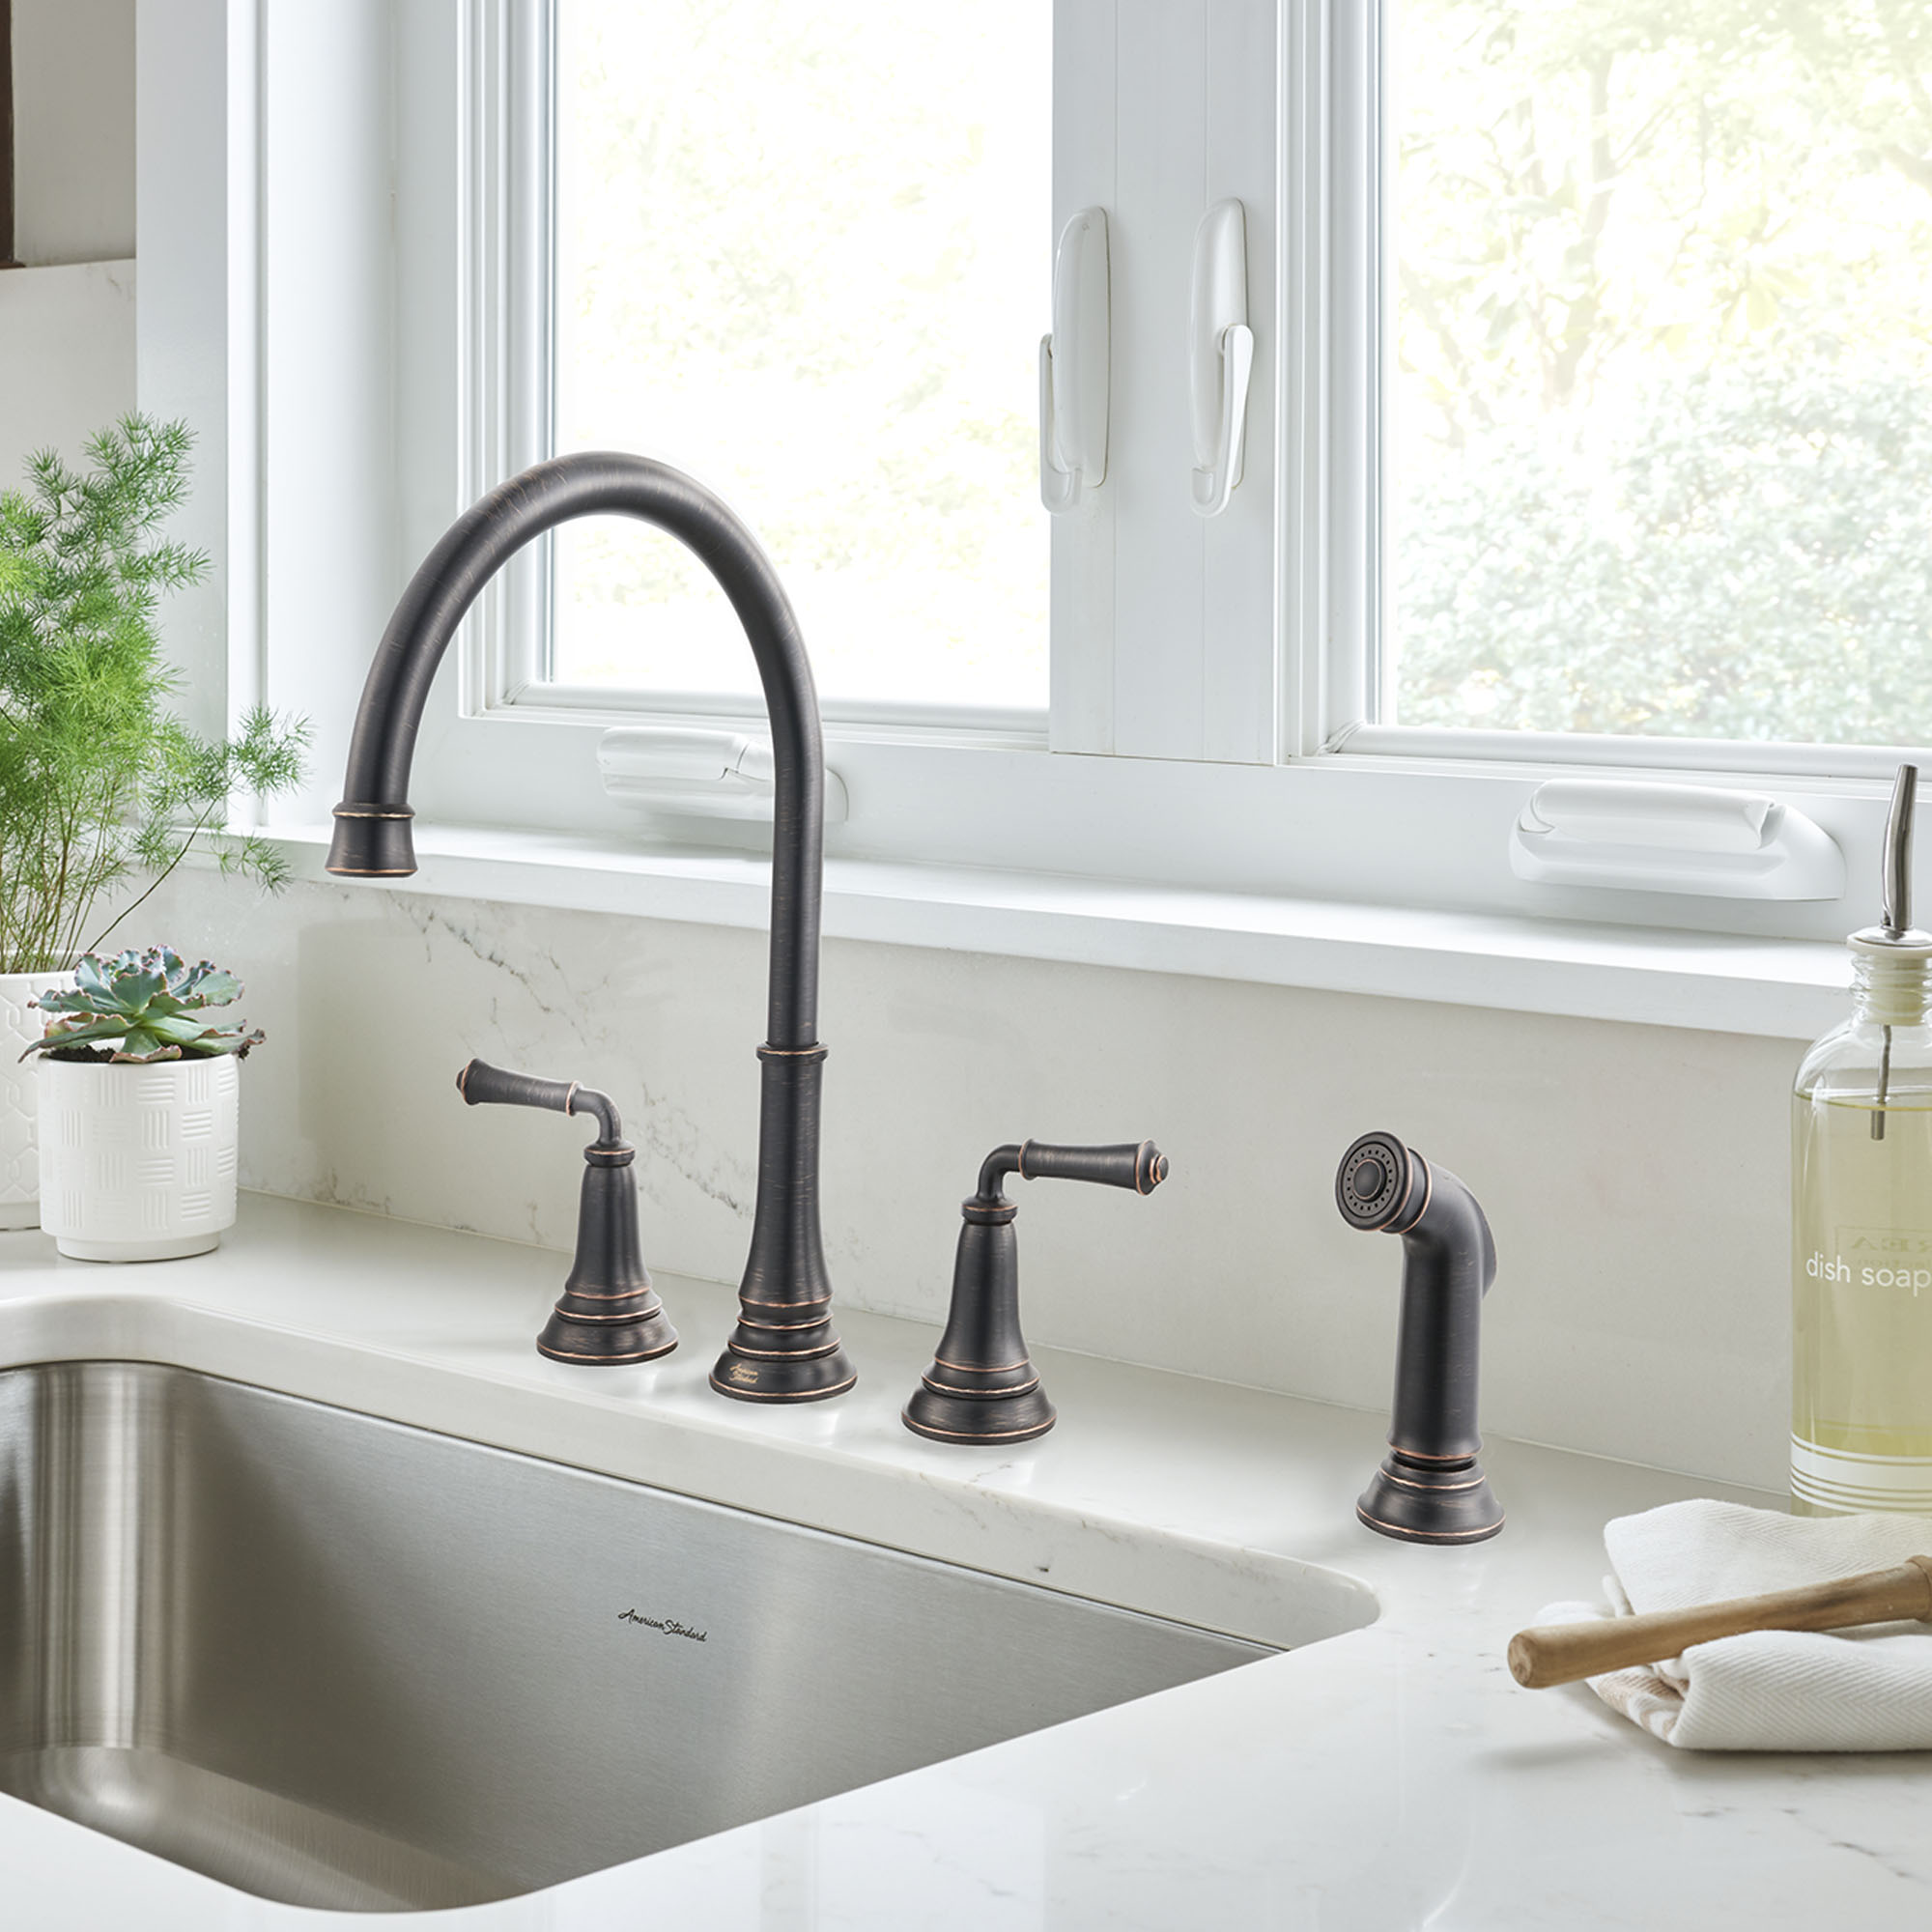 2 Handle Widespread Kitchen Faucet 1 5